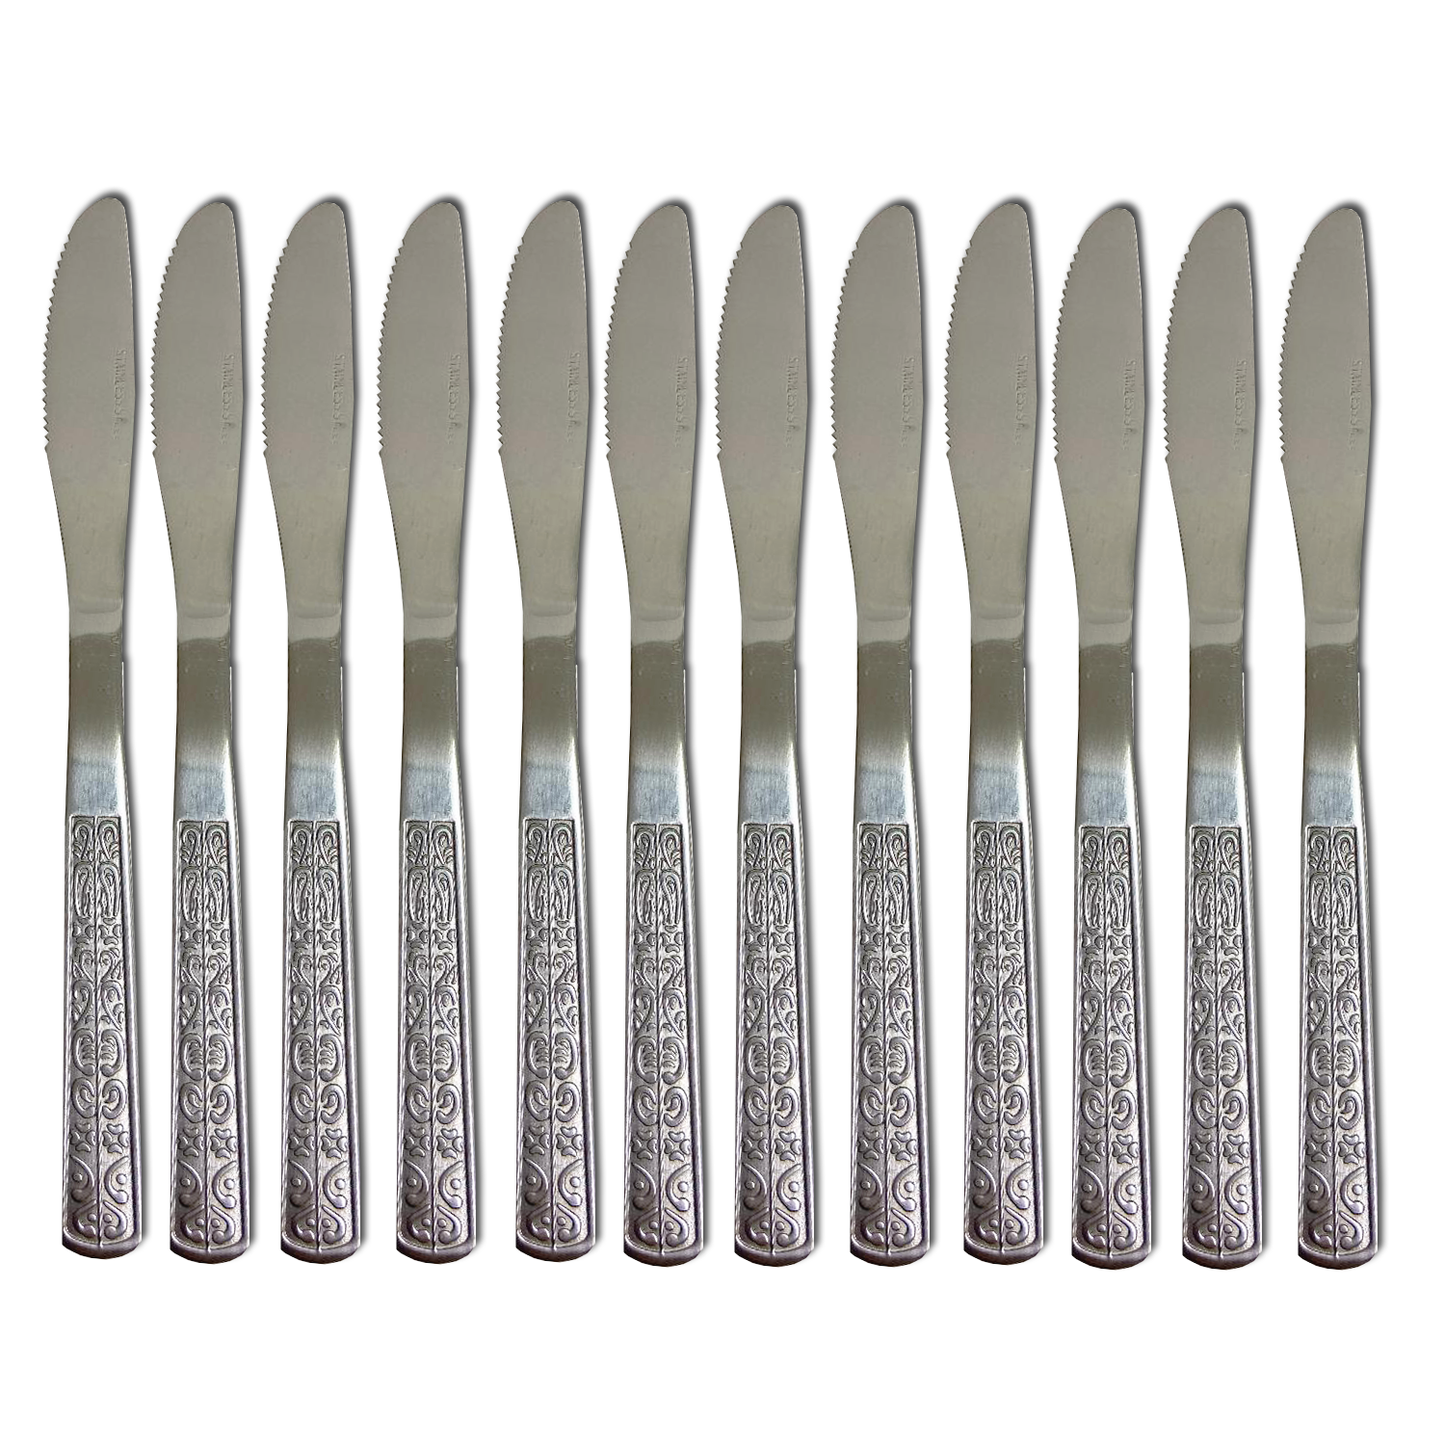 12 PC Classy Stainless Steel Silver Dinner Knife